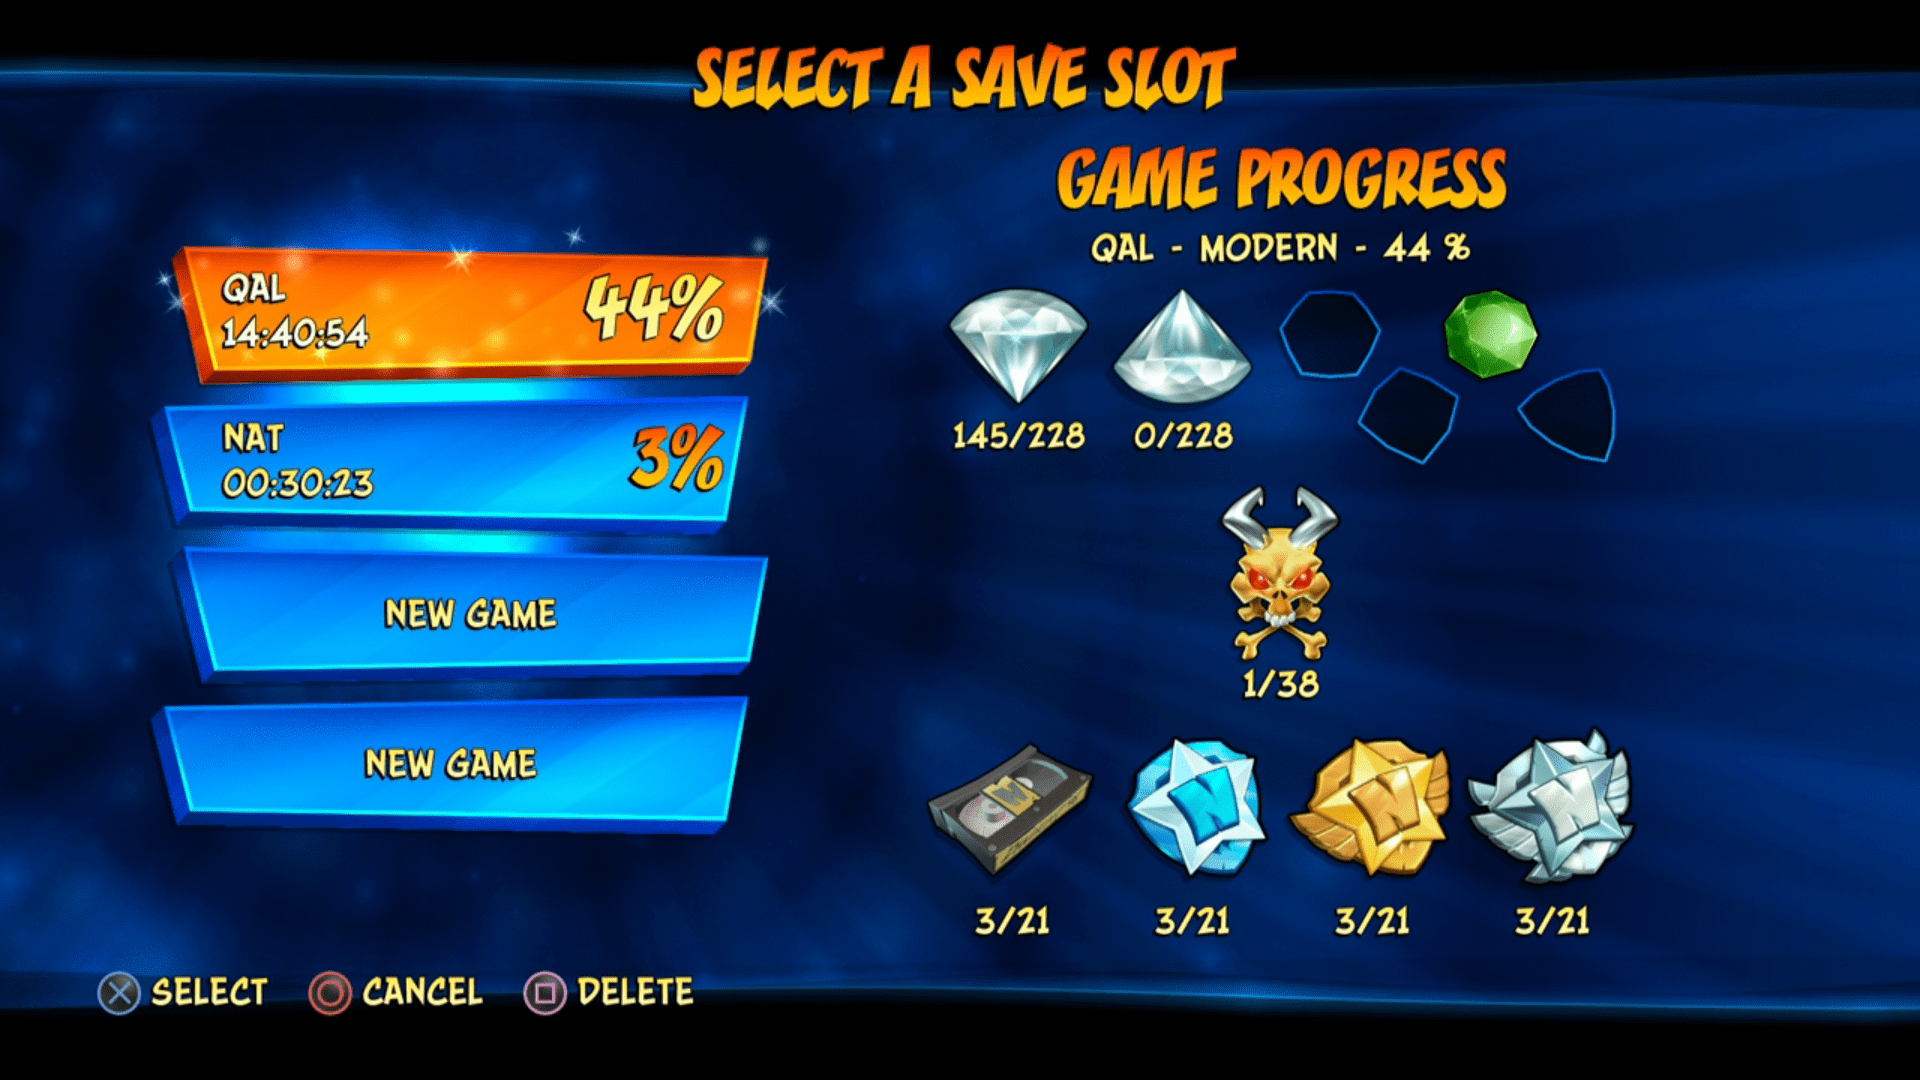 The save slots screen.